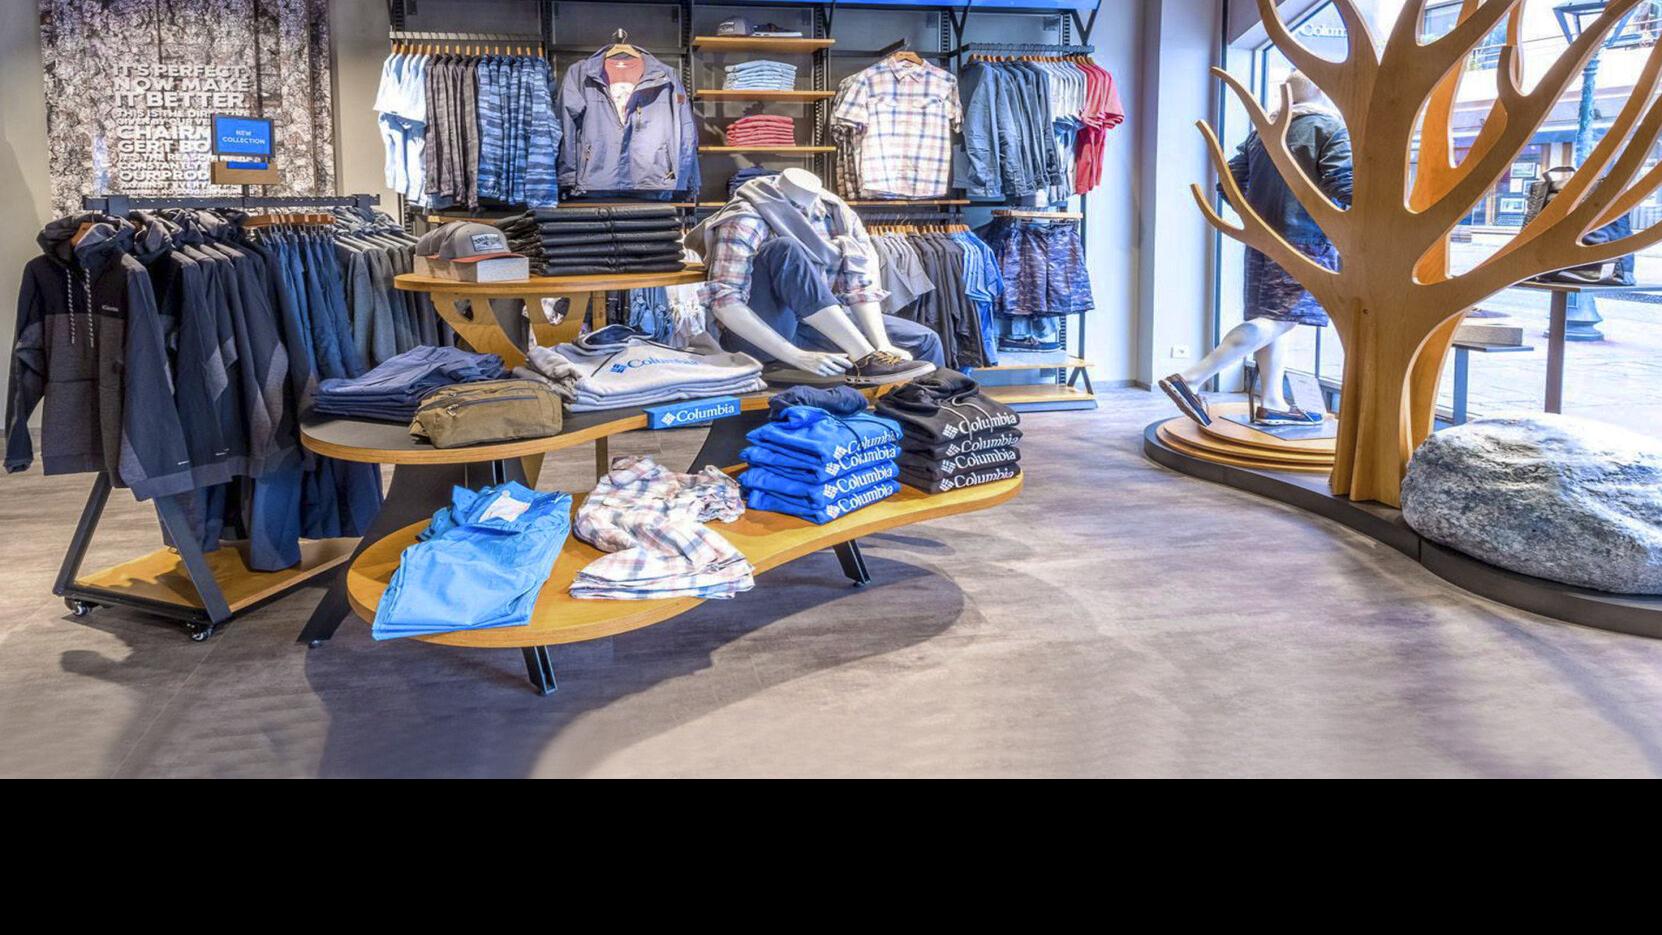 Columbia Sportswear plans state's first store at Mall of Louisiana, Business